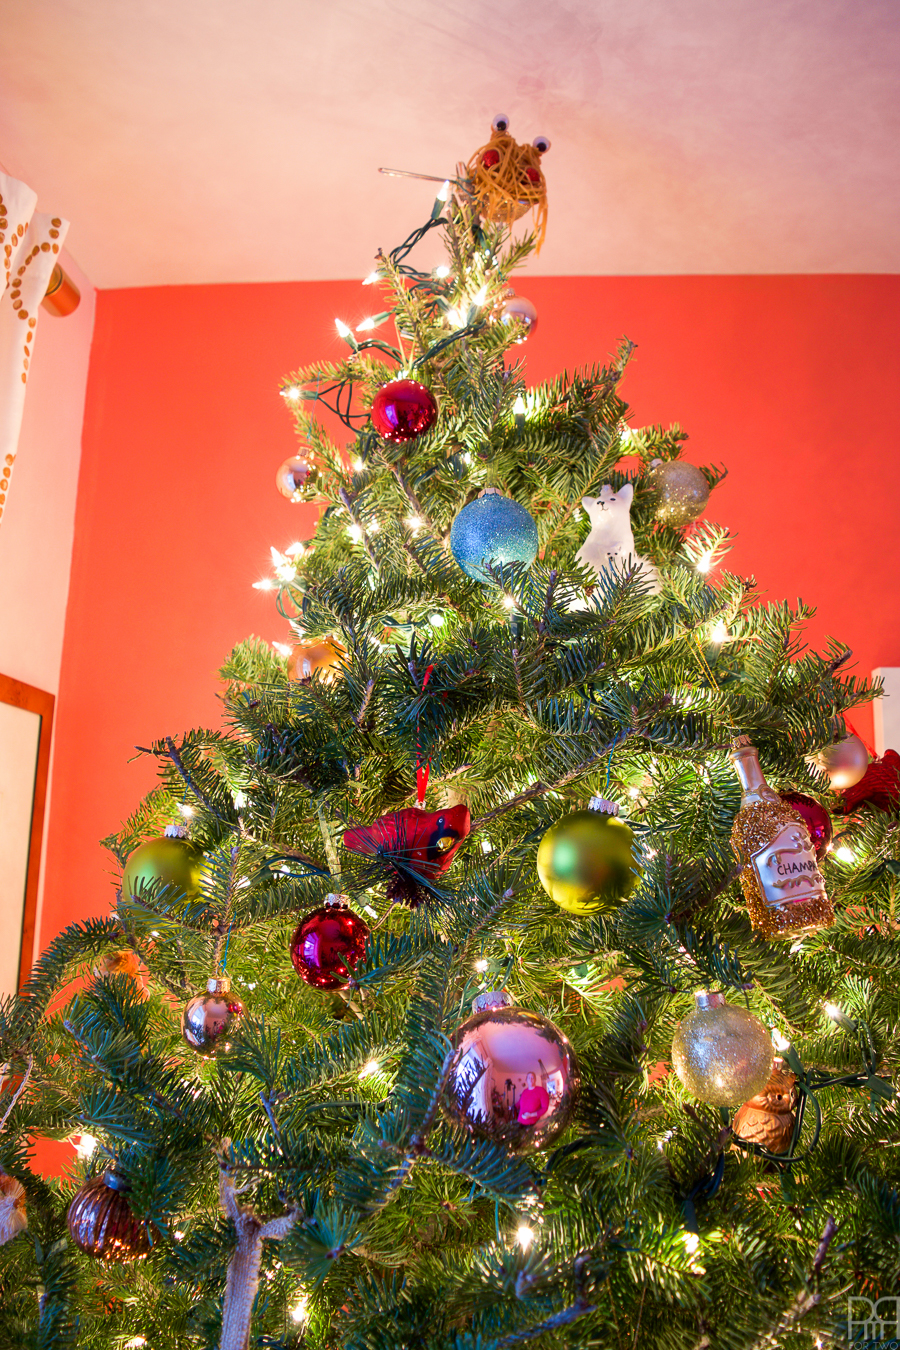 my-home-style-eclectic-bauble-tree-10